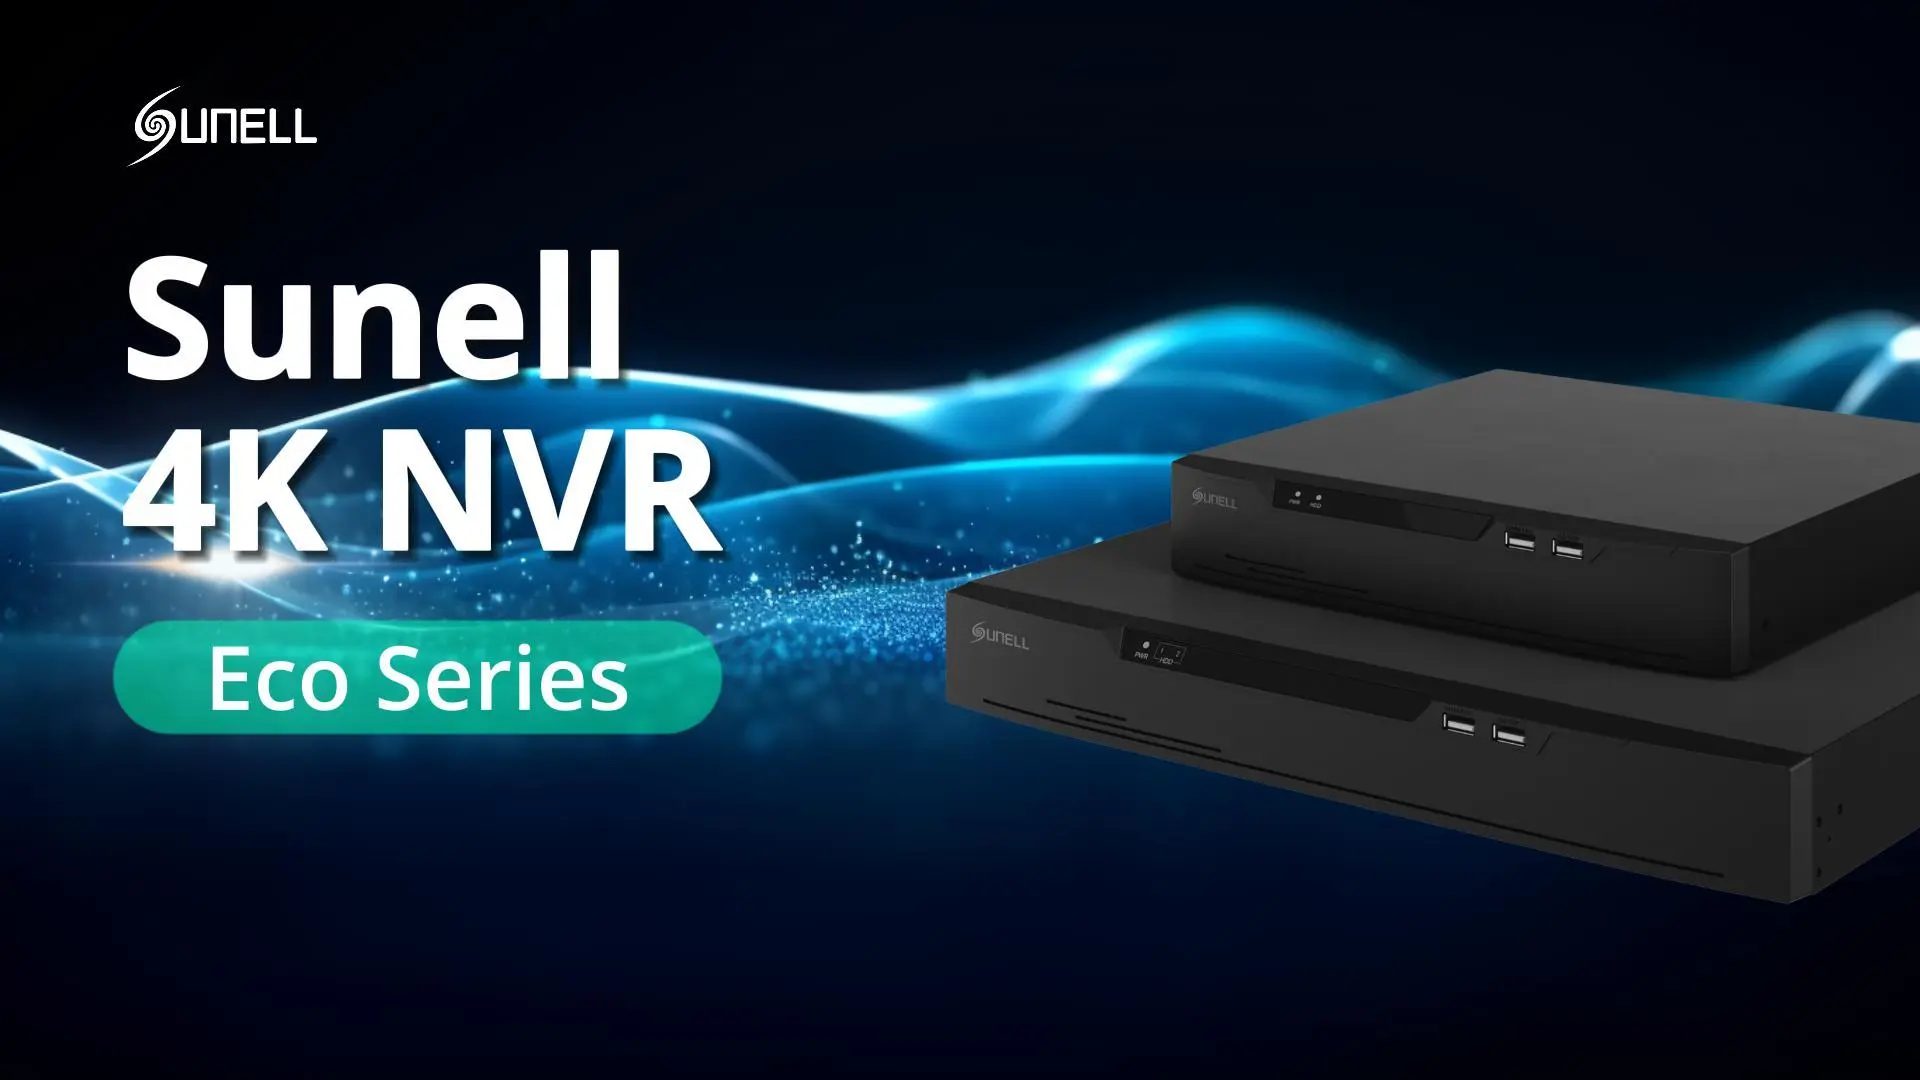 Sunell Eco Series NVR Full Features Instruction - 翻译中...